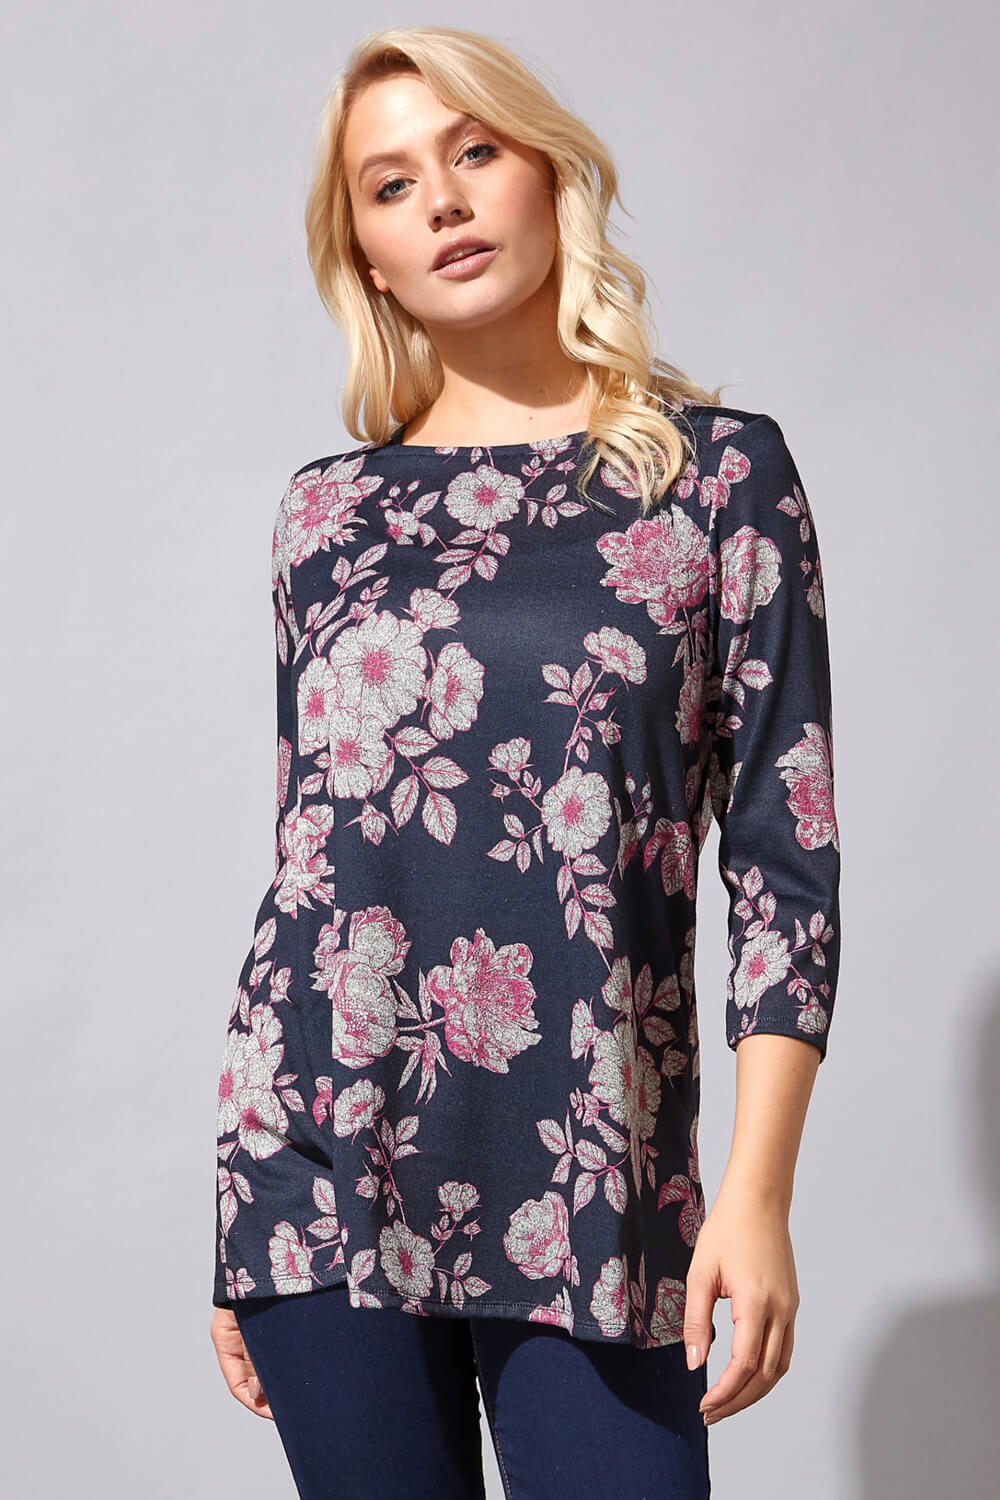 Square Neck Floral Print Tunic Top